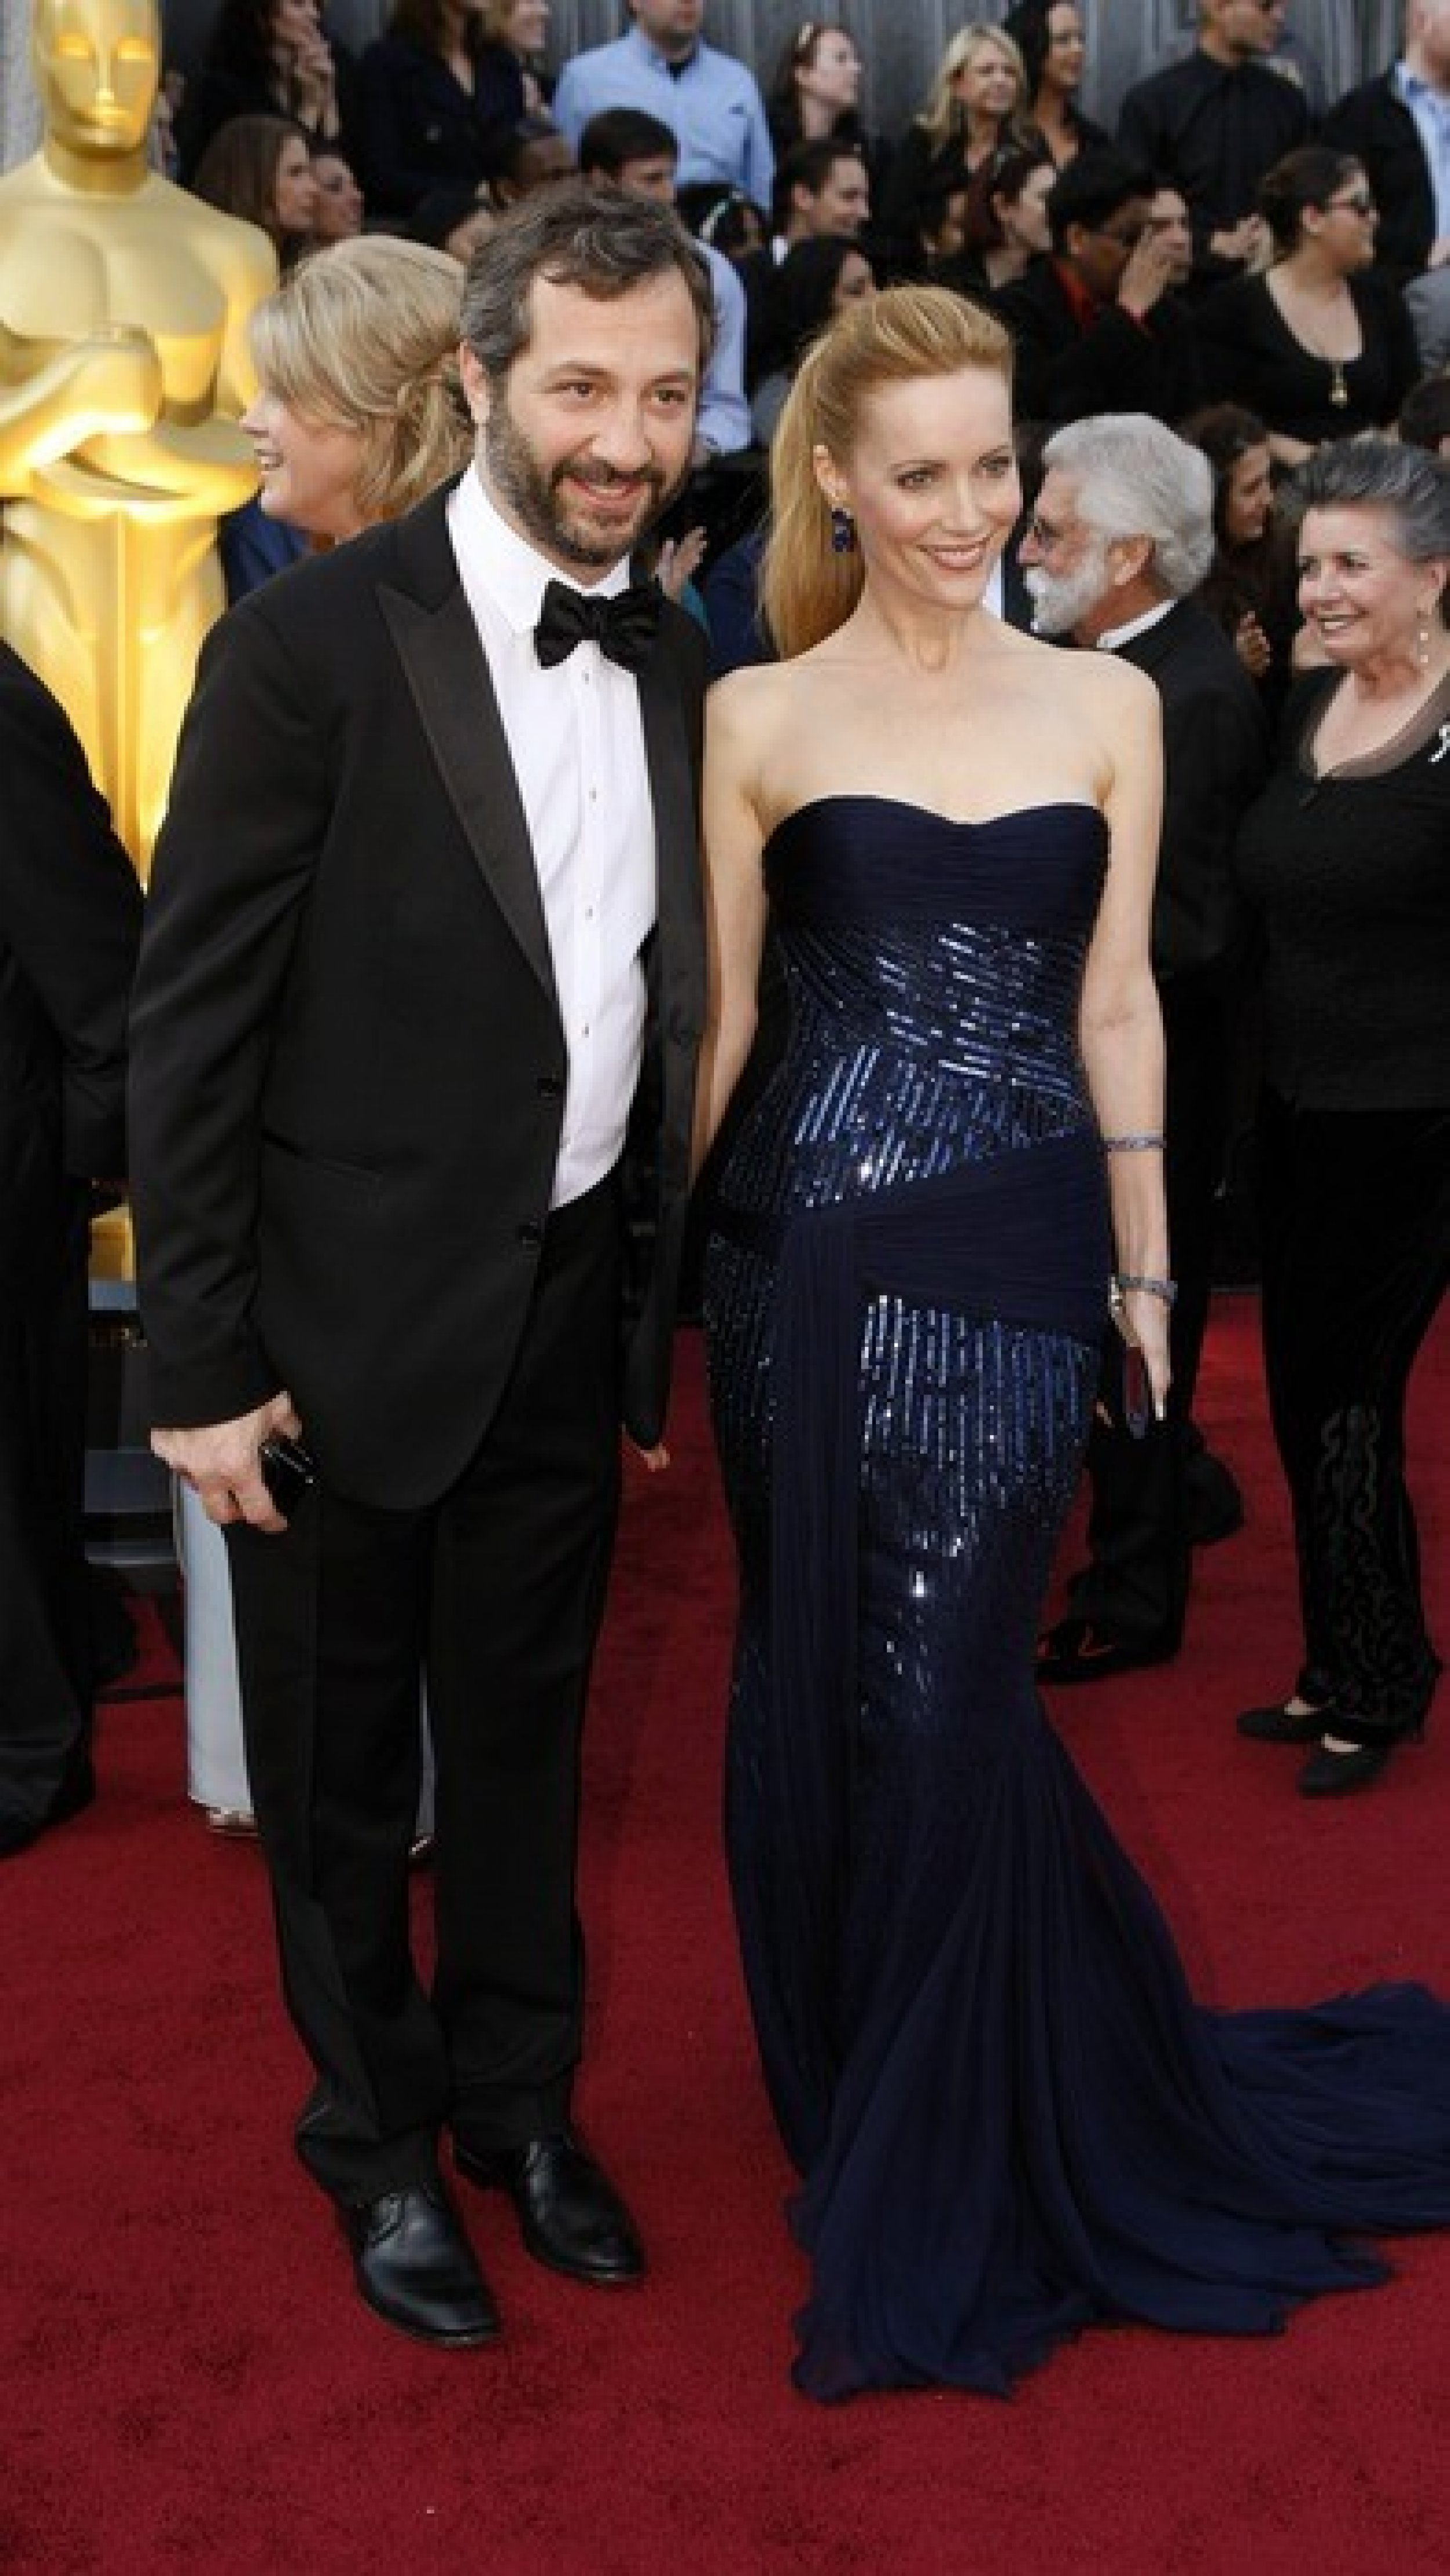 Judd Apatow and Leslie Mann arrive at the 84th Academy Awards.